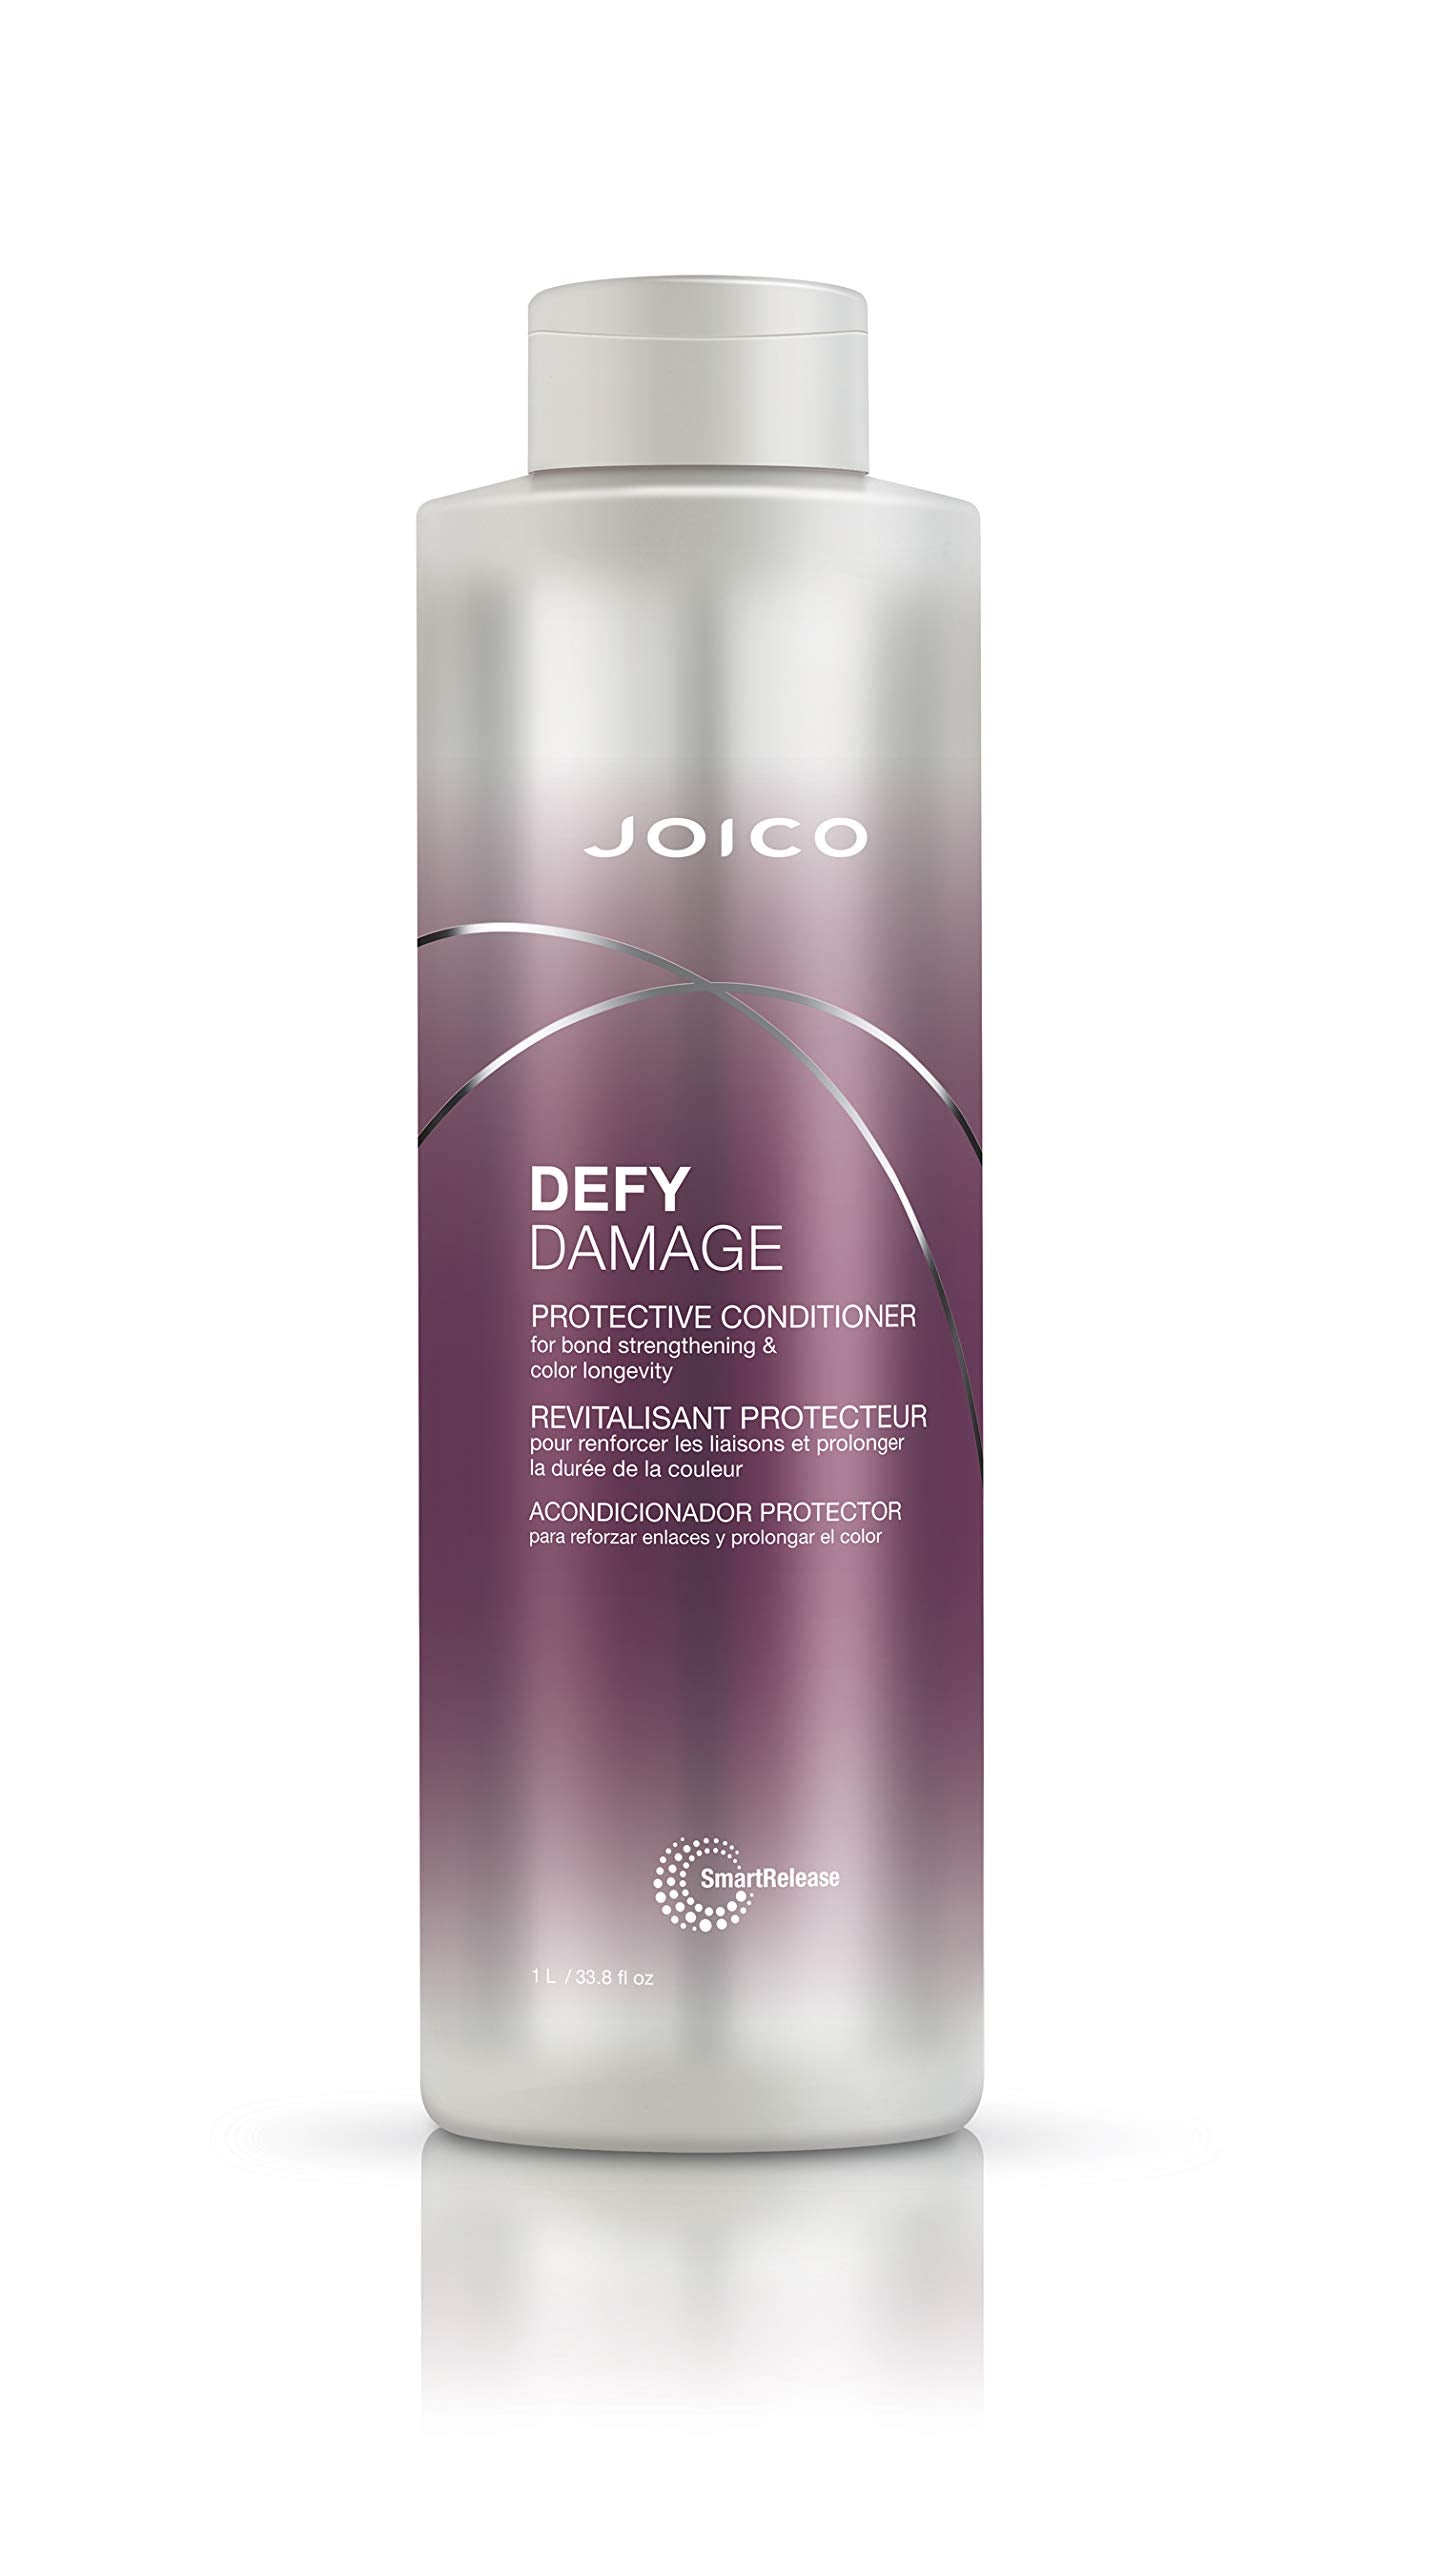 Joico Defy Damage Protective Conditioner 1L [OOS]